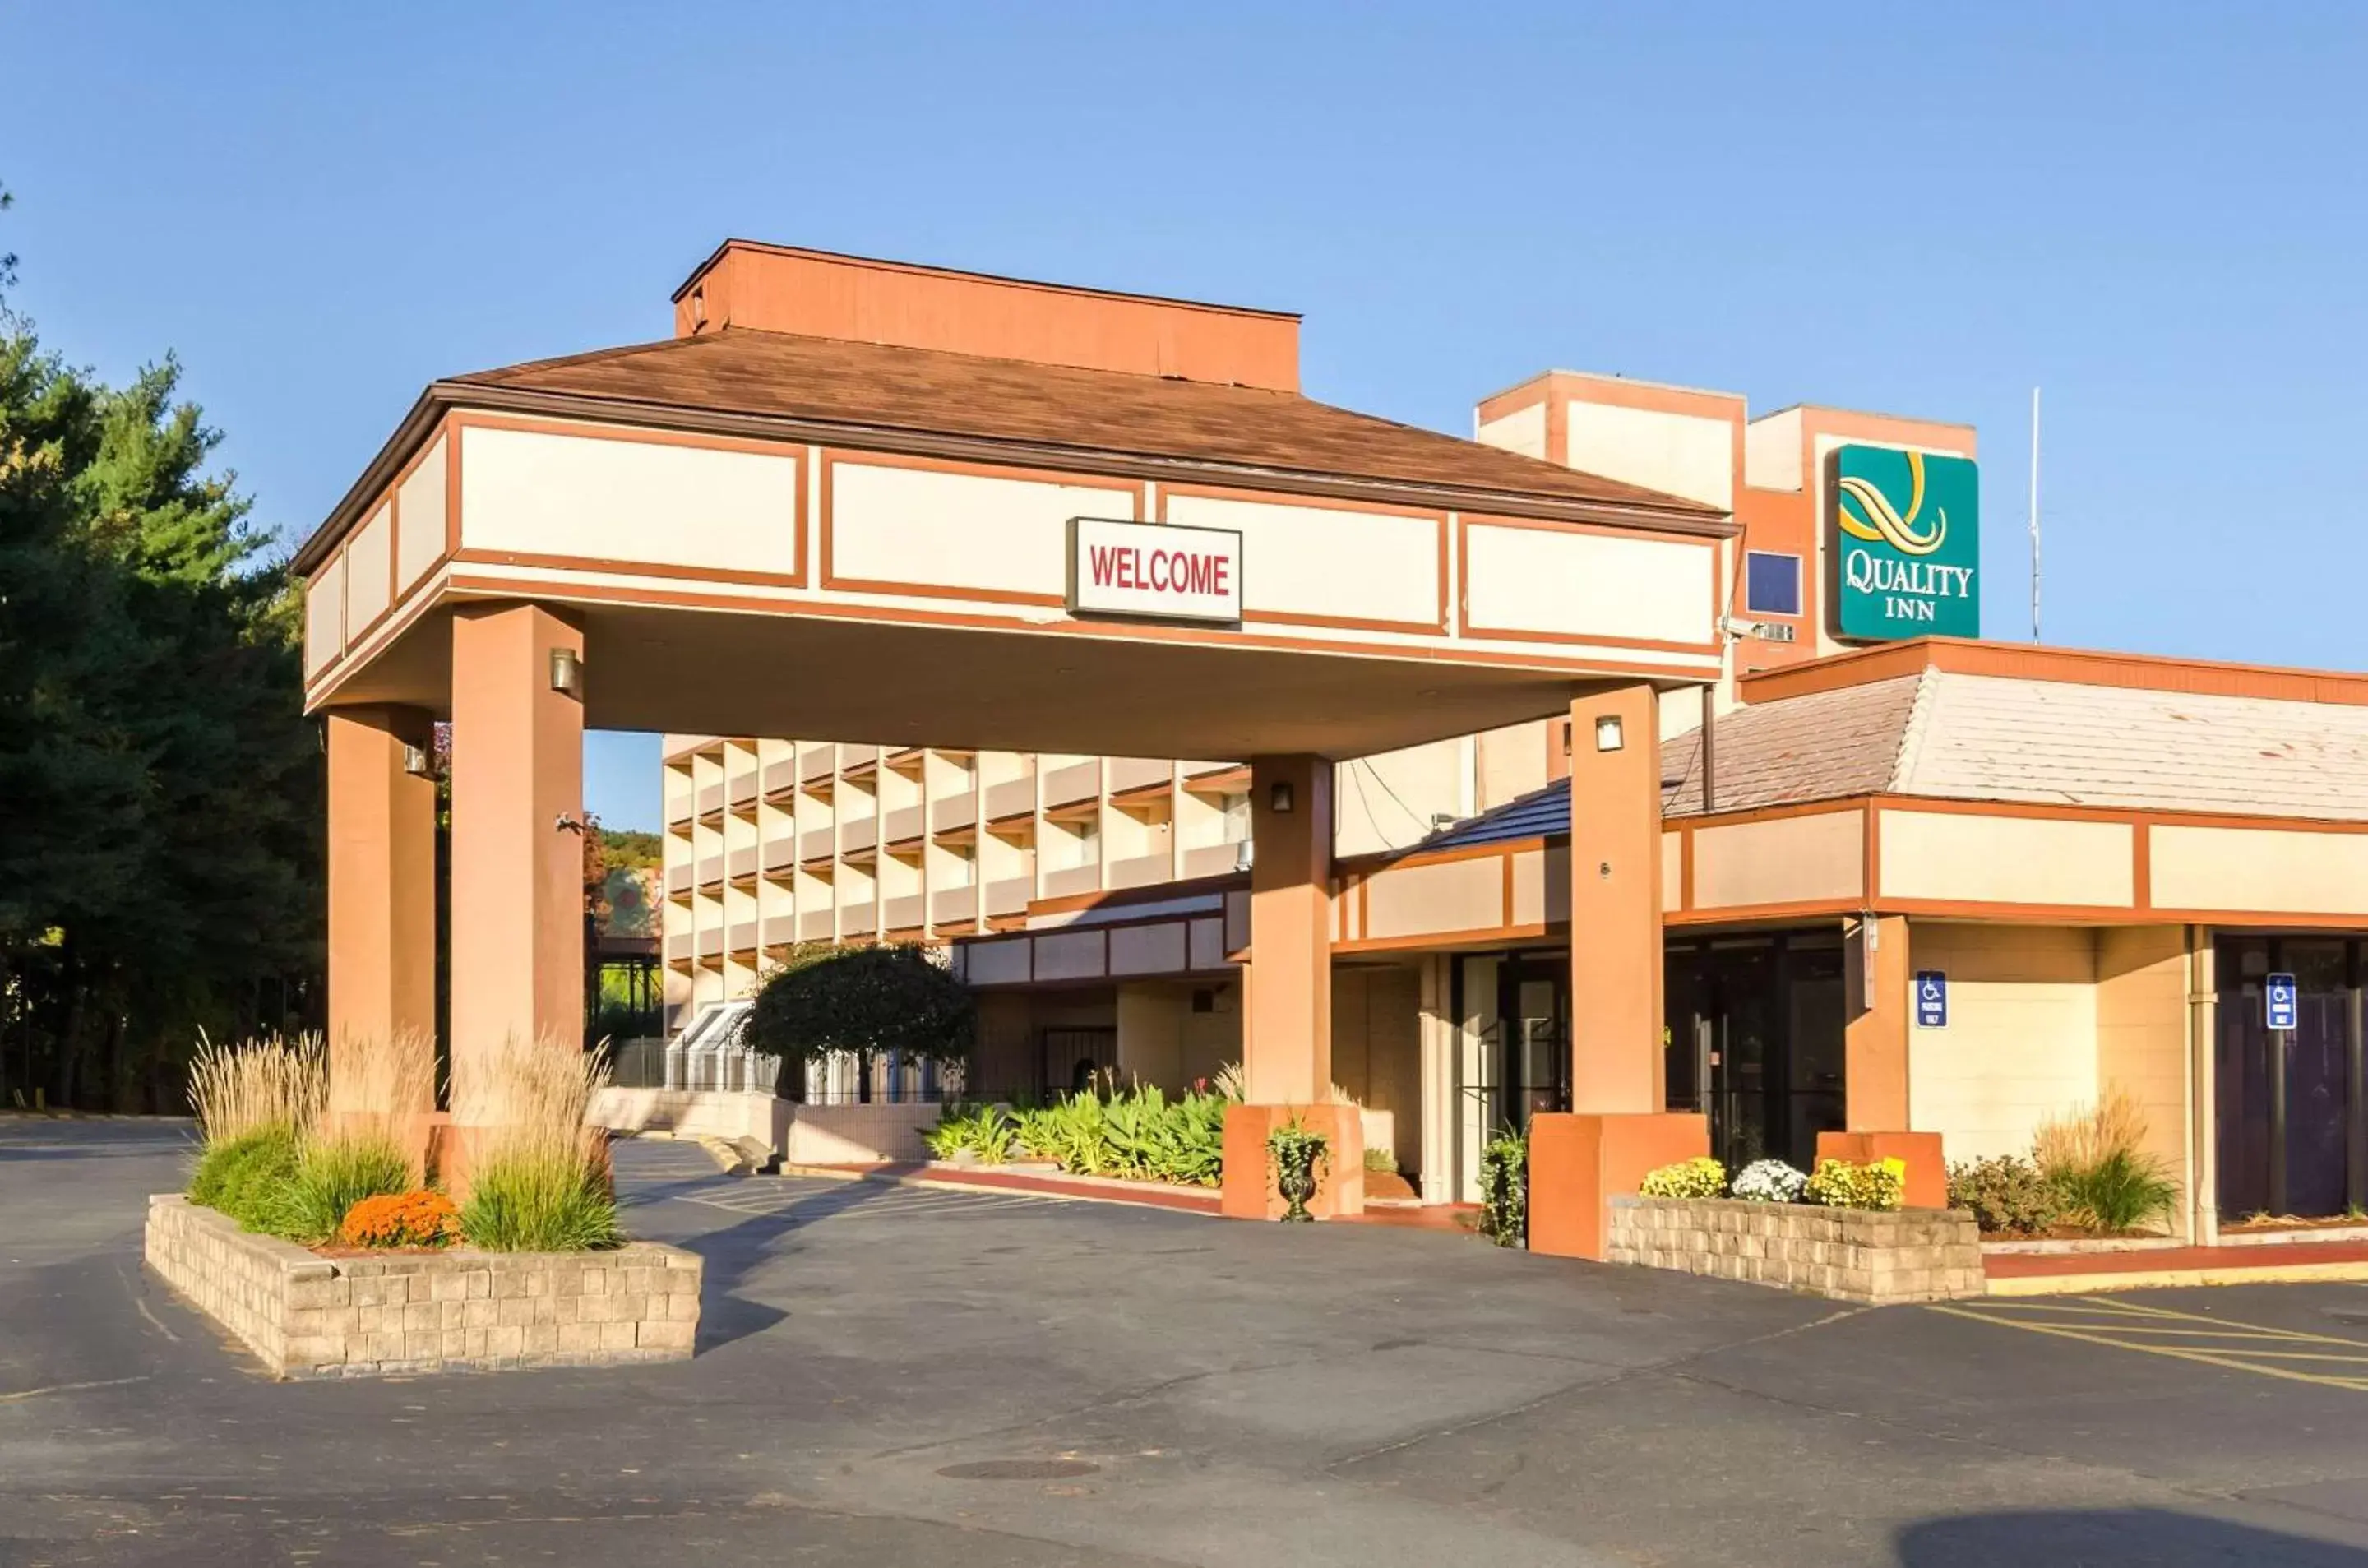 Property Building in Quality Inn West Springfield